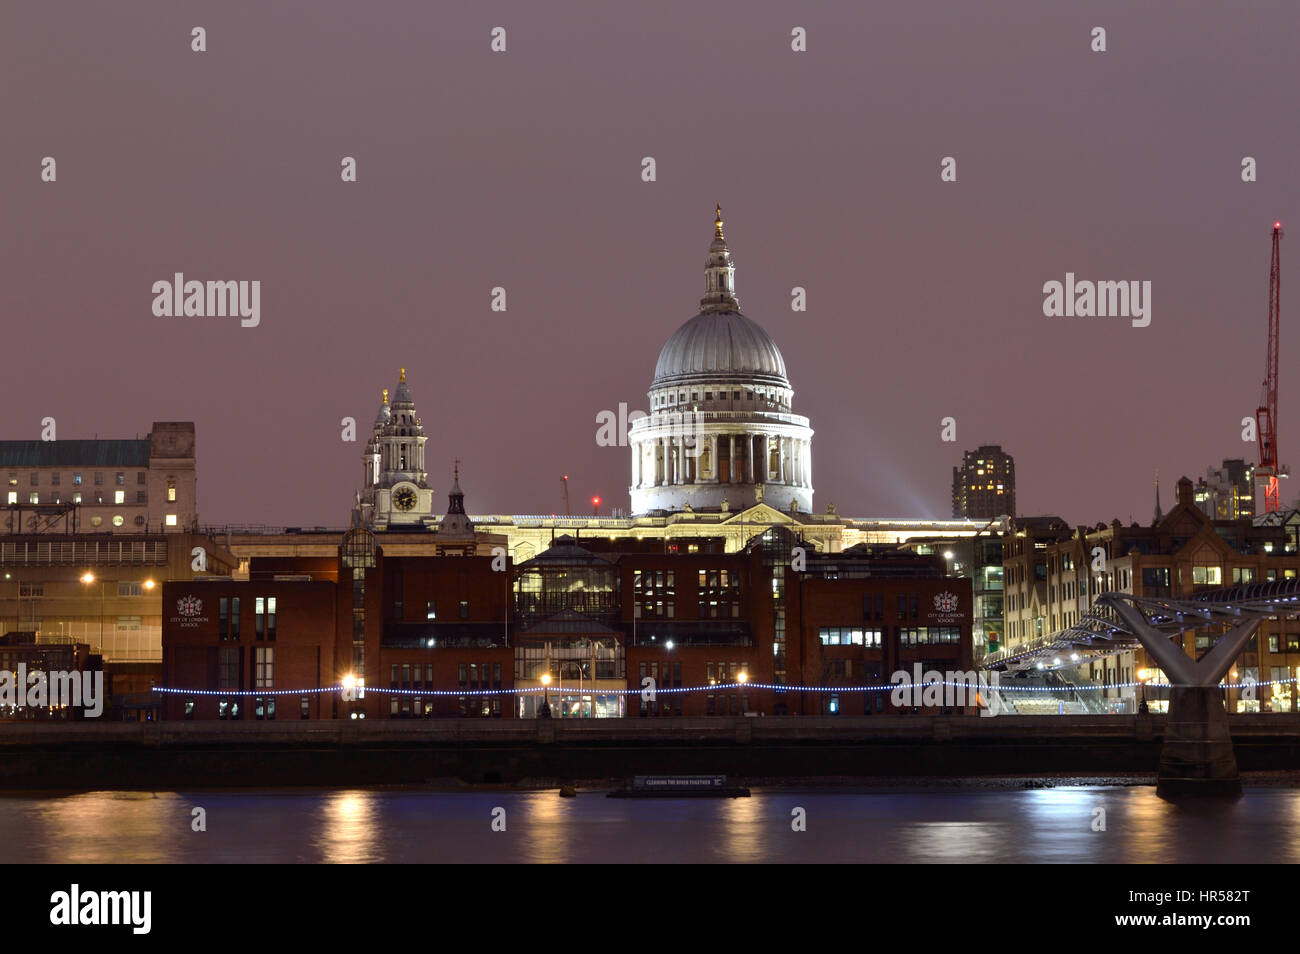 View over the Thames river to St Paul's cathedral at night in 2017, London, cityscape, UK Stock Photo